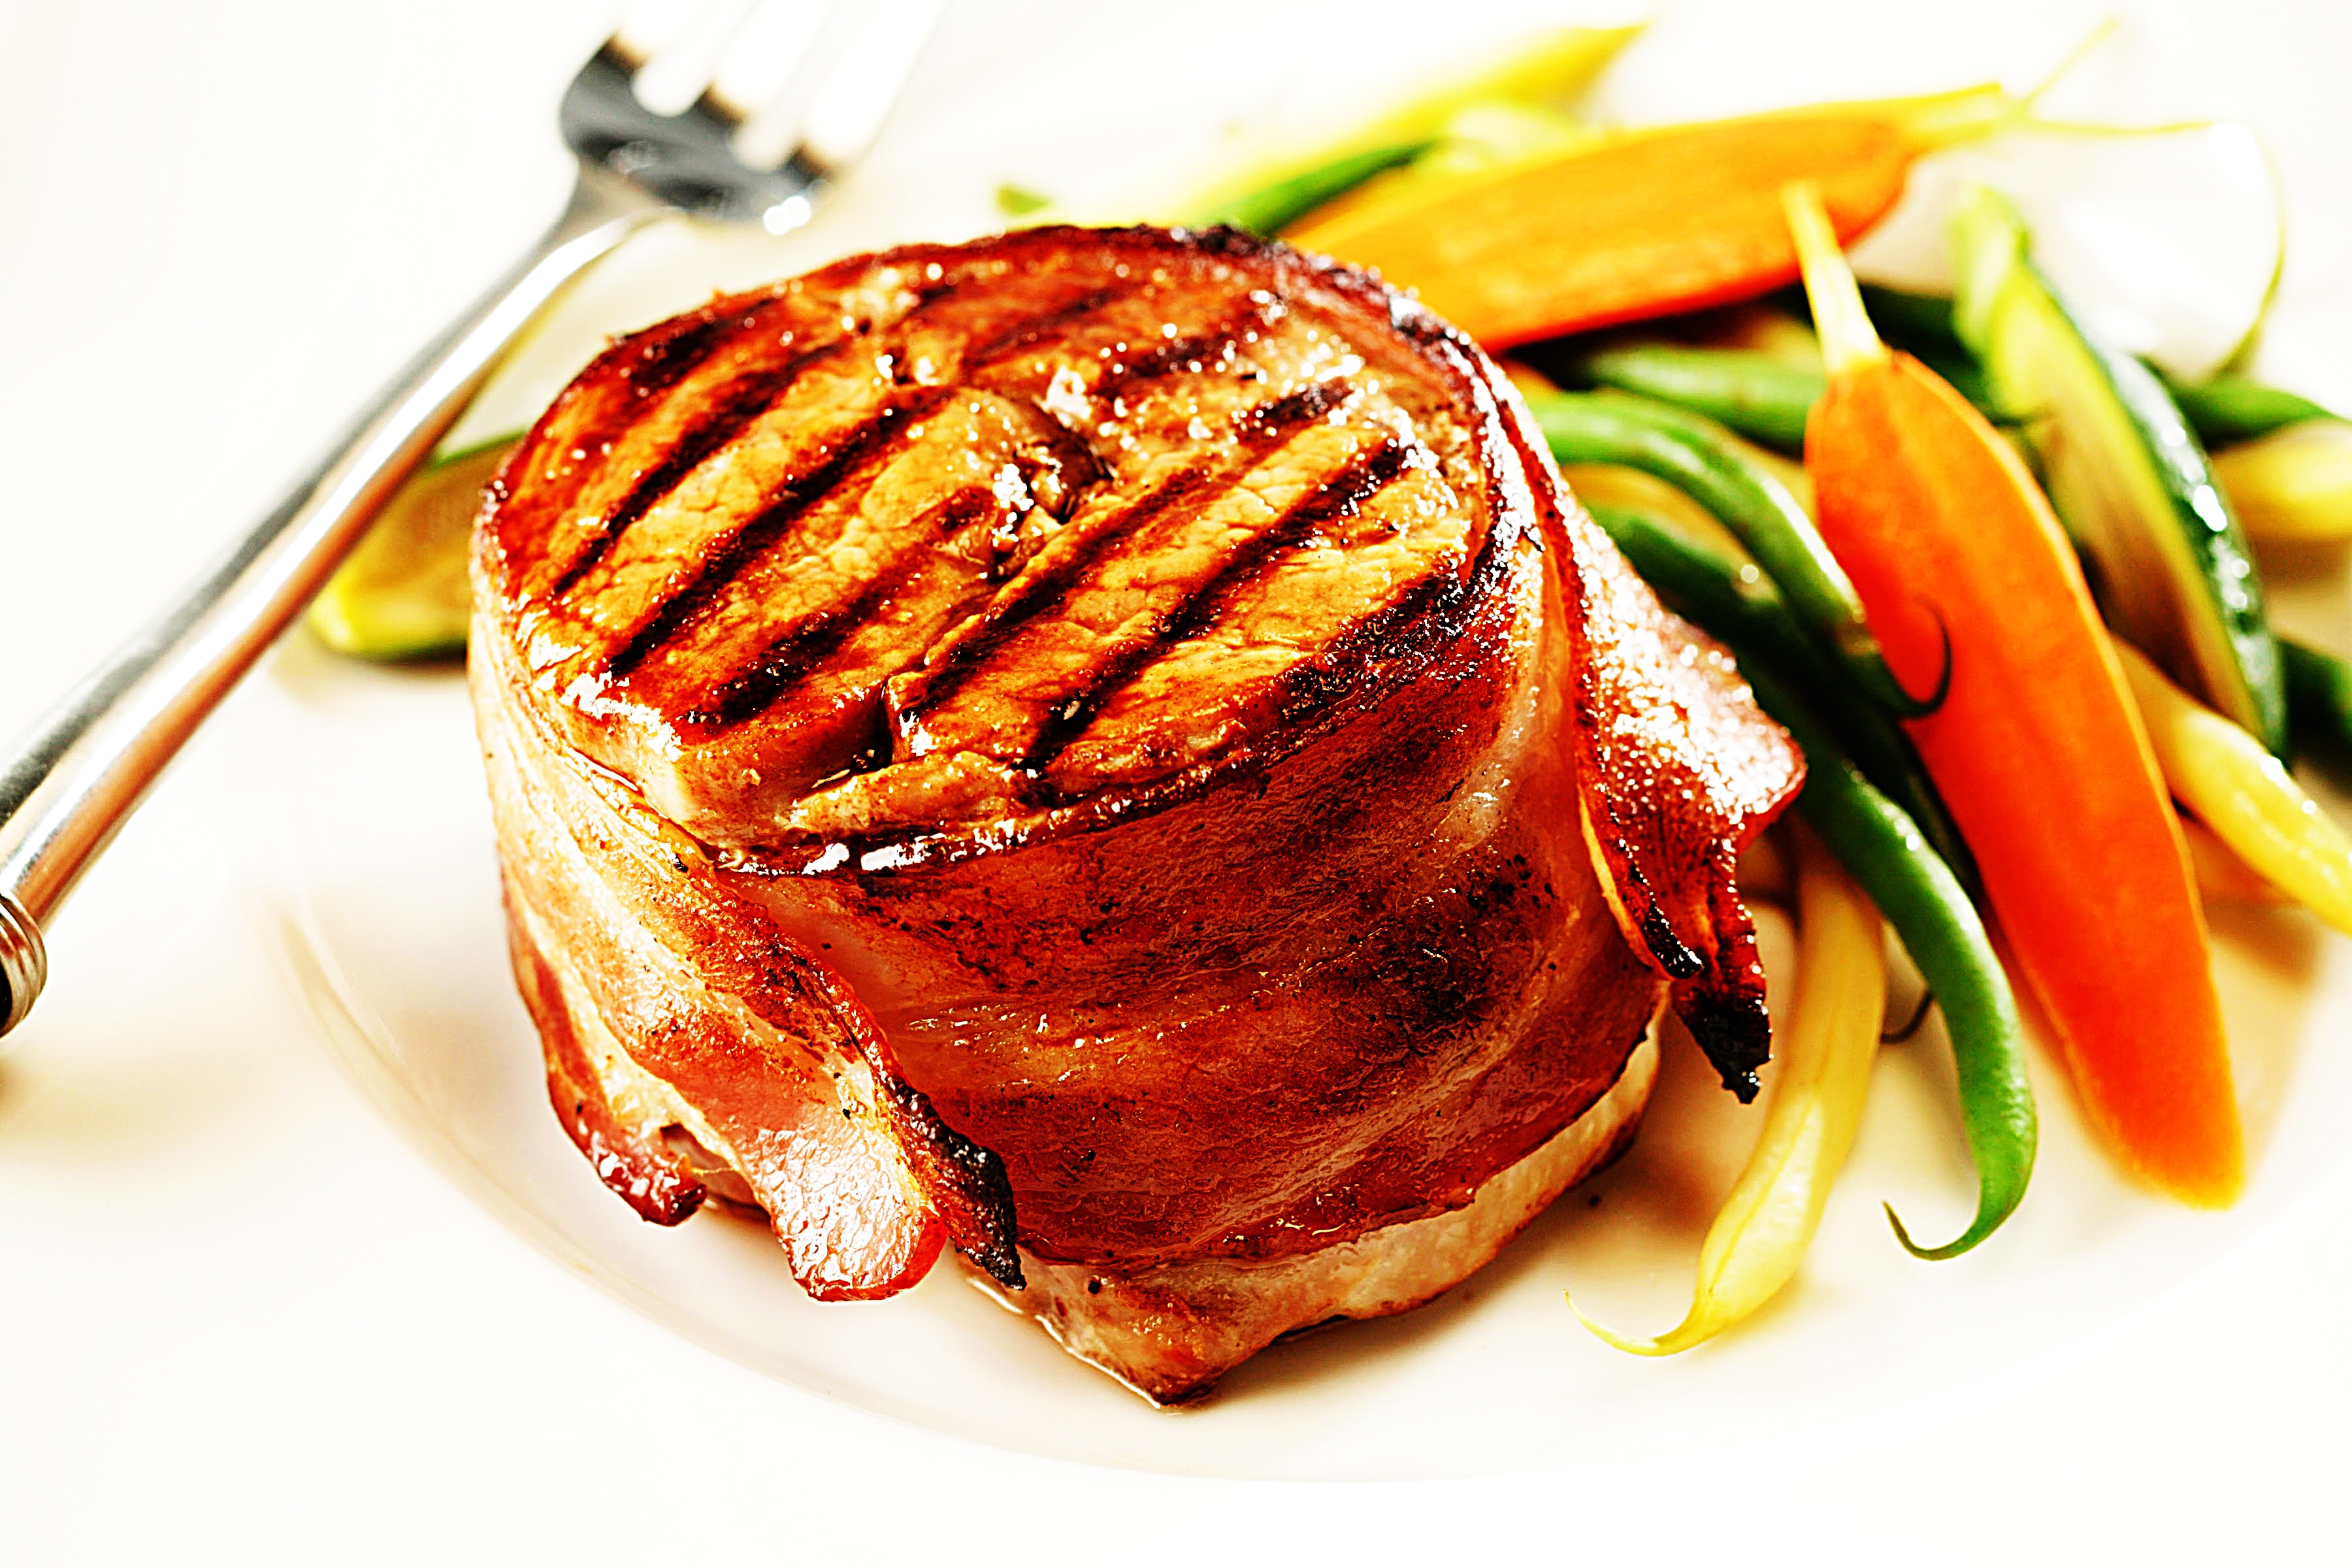 Stupid-Easy Recipe for Bacon-Wrapped Pork Medallions with Garlic-Mustard Butter (#1 Top-Rated)